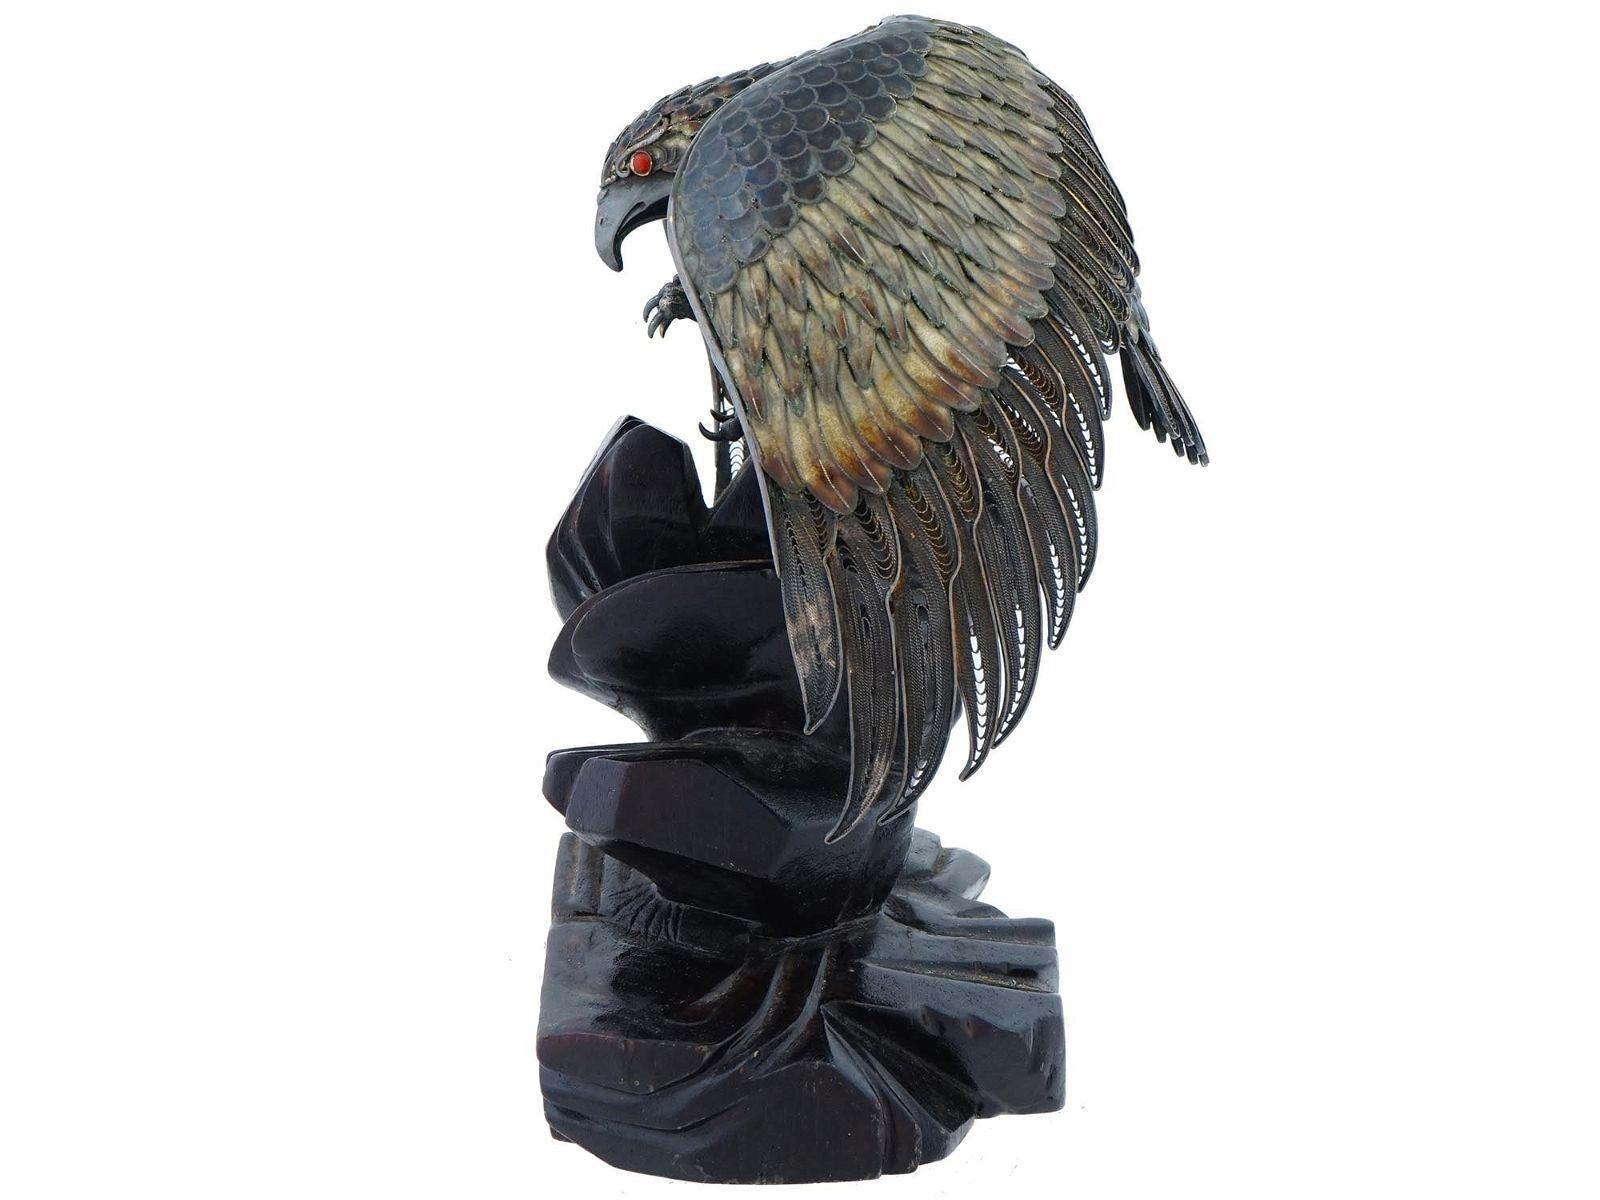 Vintage Enamel and Silver Filigree Eagle Figurine on Stand In Good Condition For Sale In New York, NY